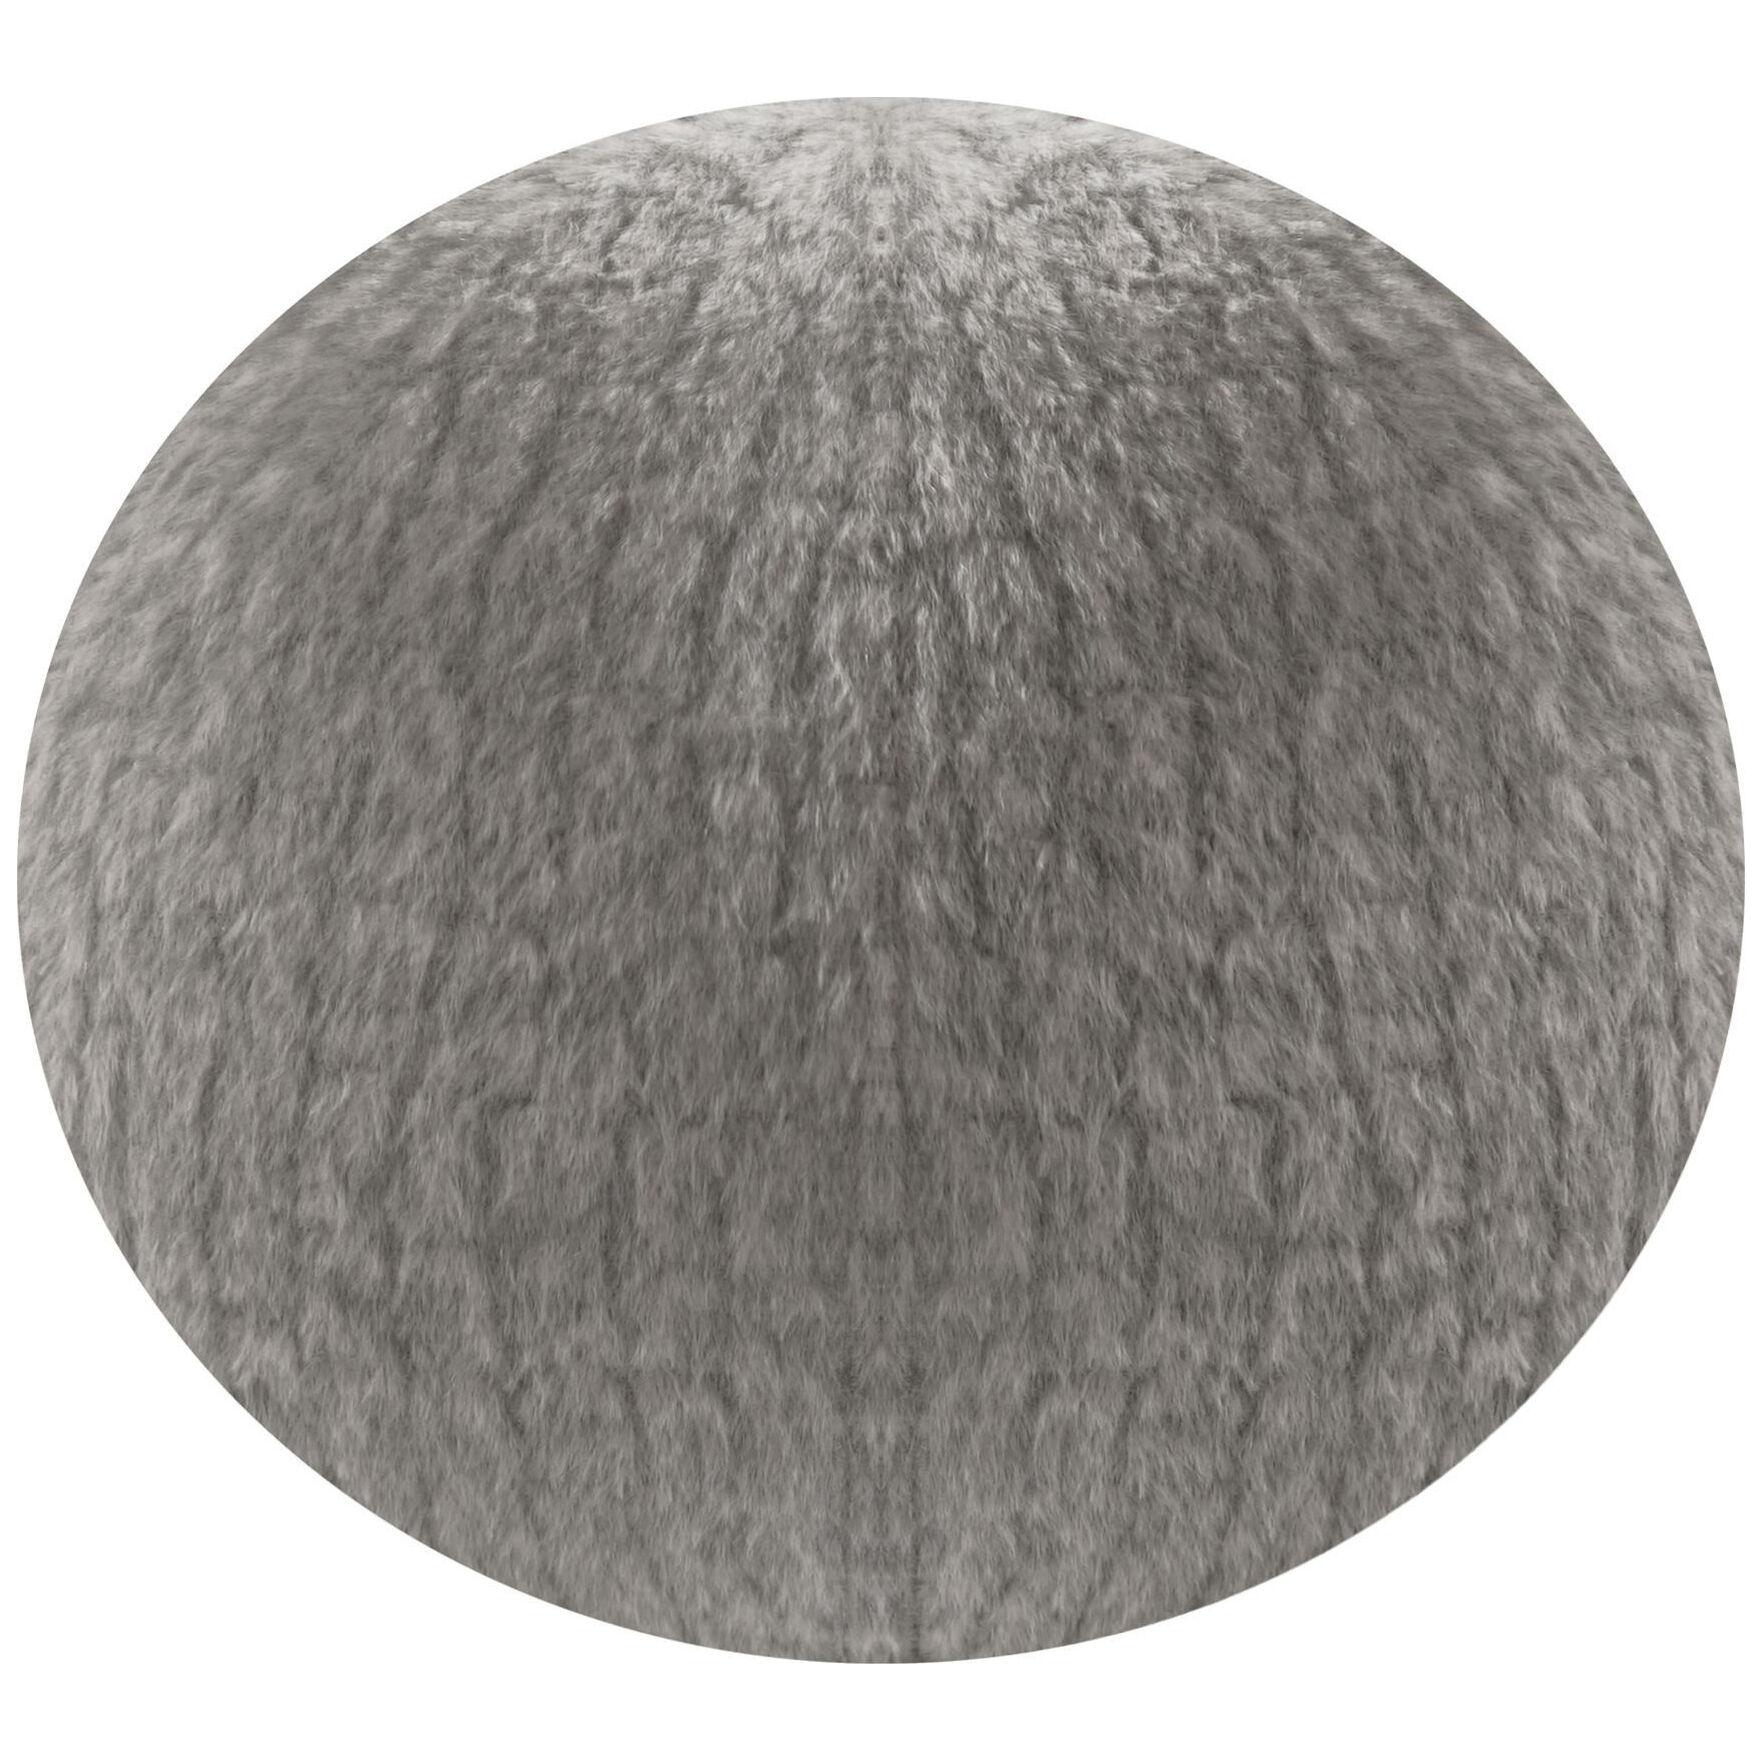 Orb Accent Pillow in Grey Alpaca by Holly Hunt